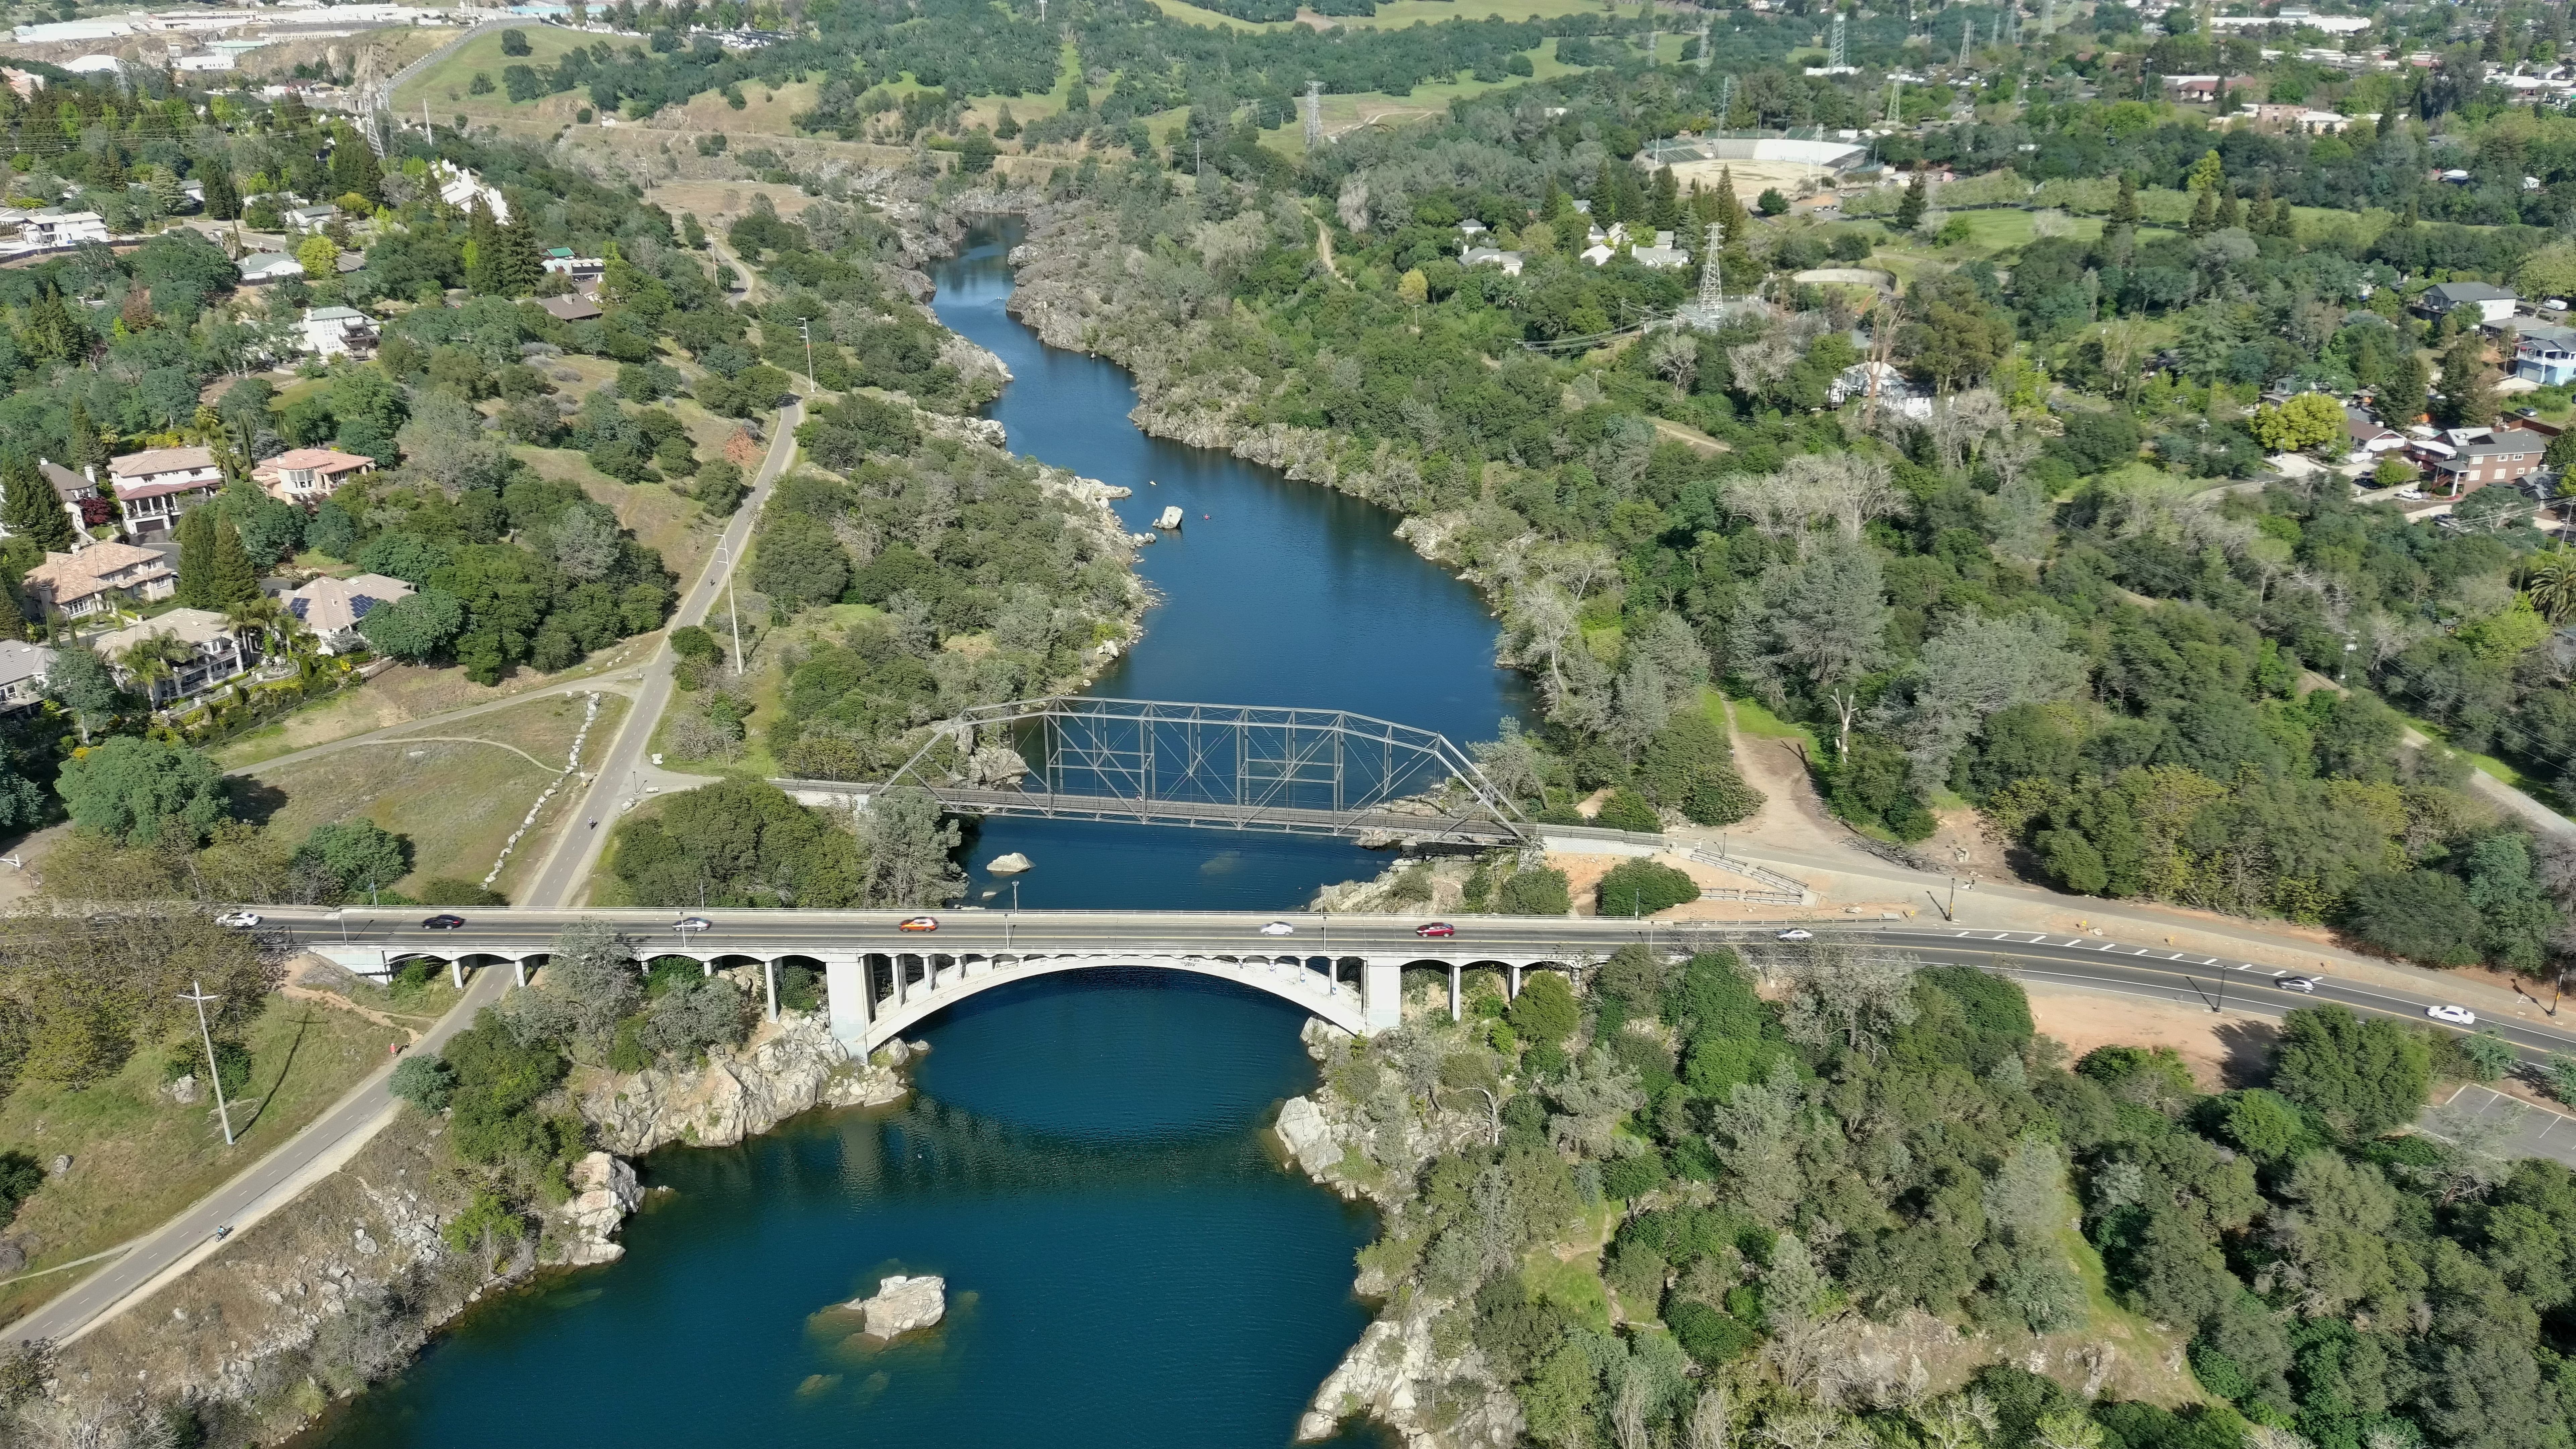 The American River Parkway Foundation: Our partner in protecting the Lower American River